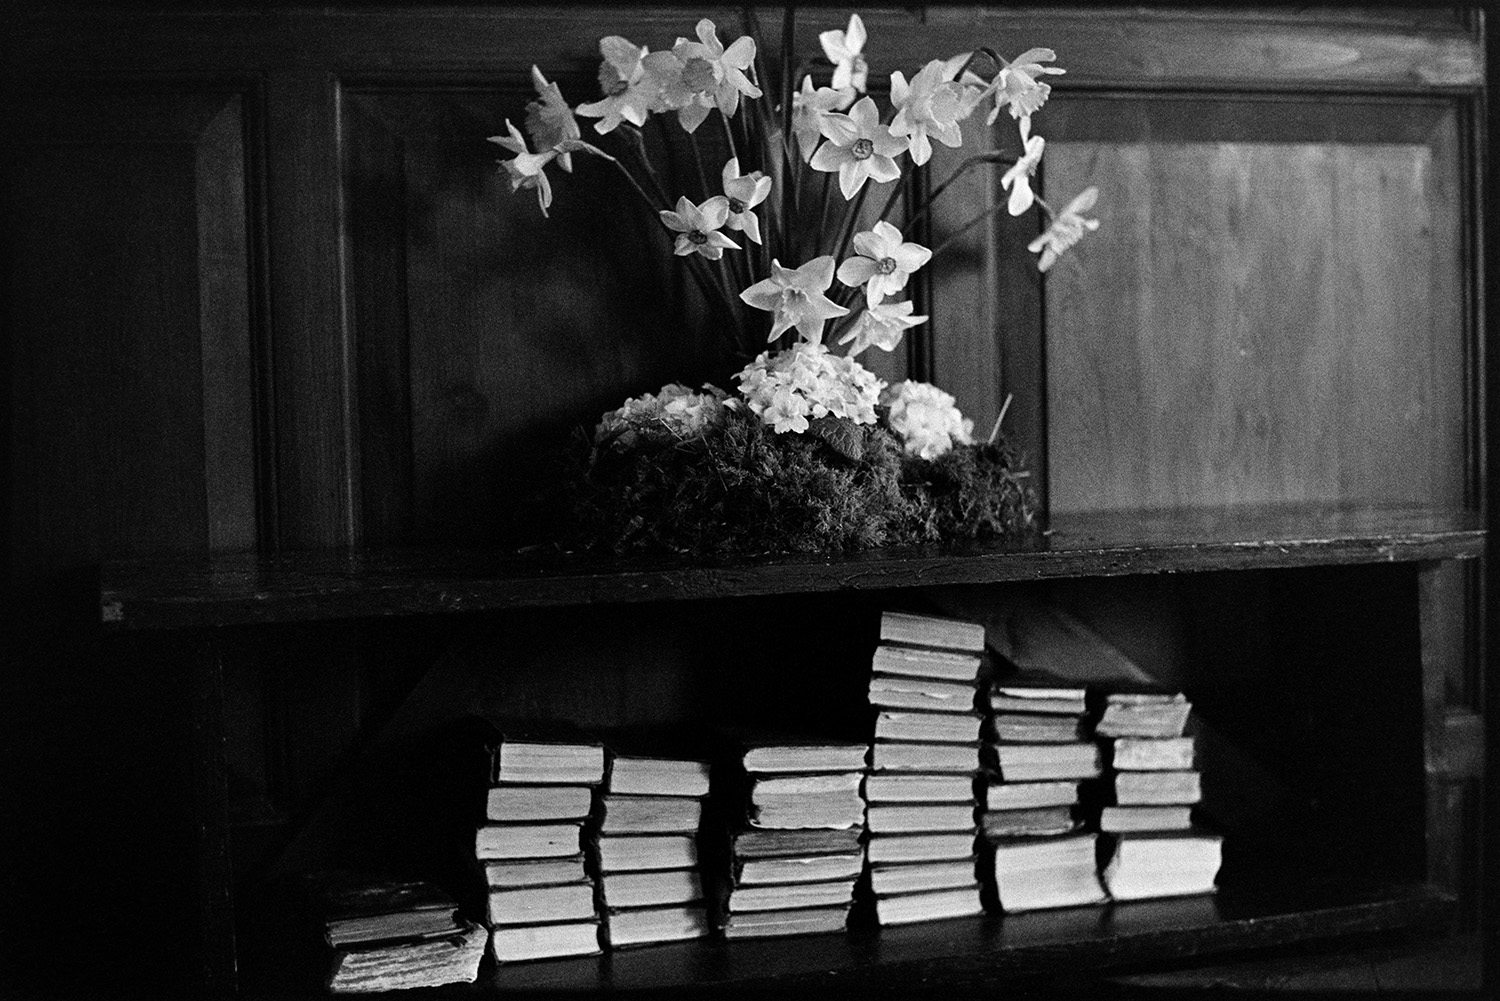 Easter flowers on lectern and with hymn books. 
[A display of daffodils for Easter in Dowland Church. They are positioned above a wooden shelf containing hymnbooks.]